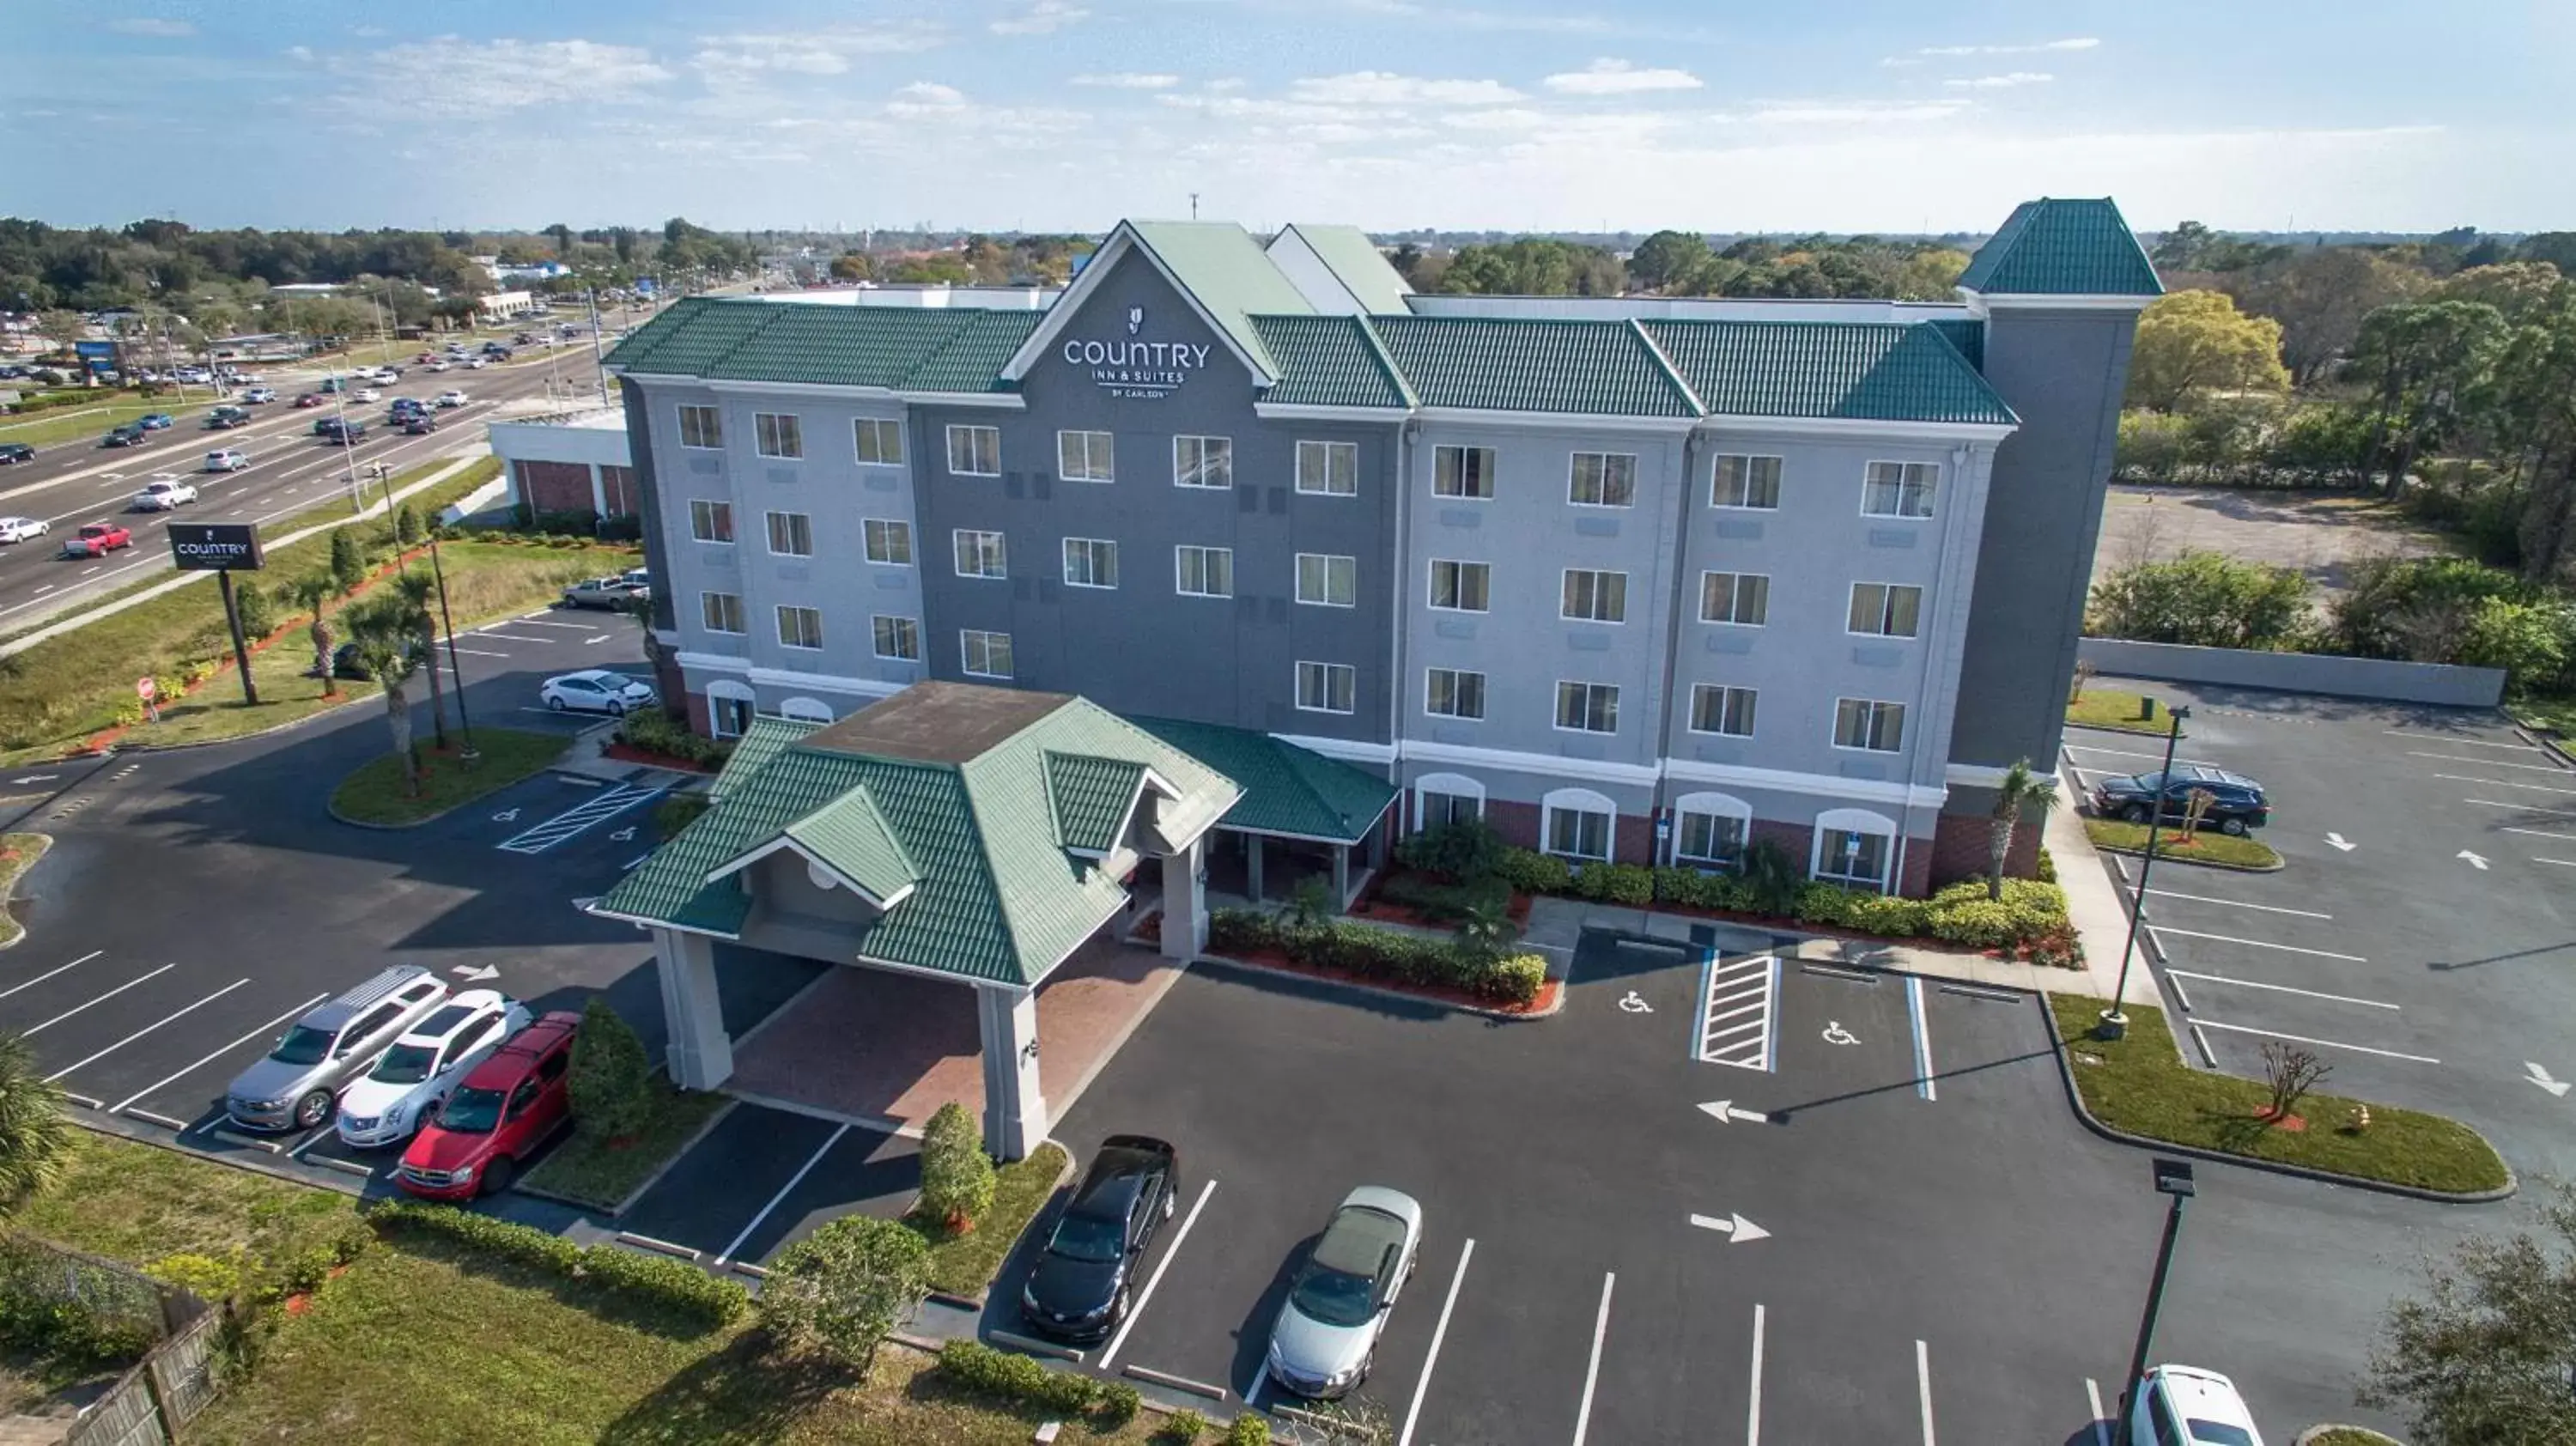 Property building, Bird's-eye View in Country Inn & Suites by Radisson, St. Petersburg - Clearwater, FL